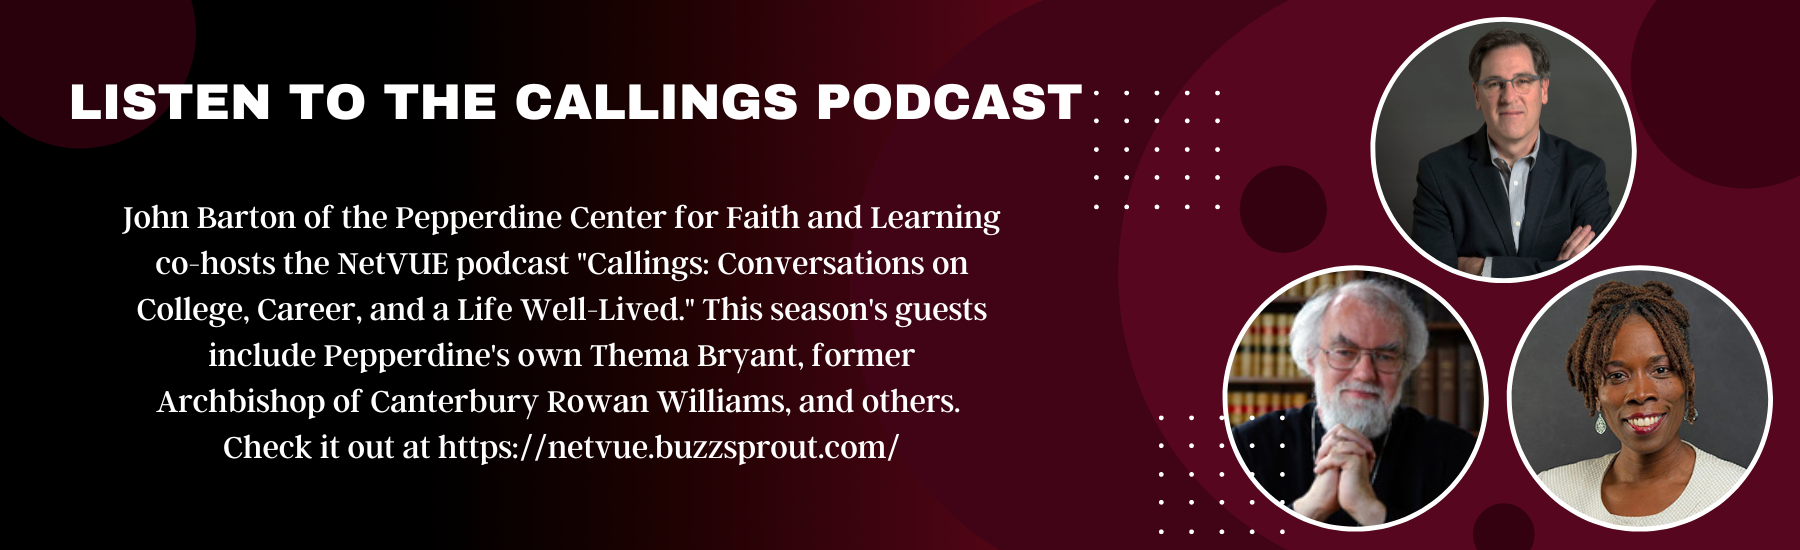 Callings podcast advertisement with photos of John Barton, Rowan Williams and Thema Bryant